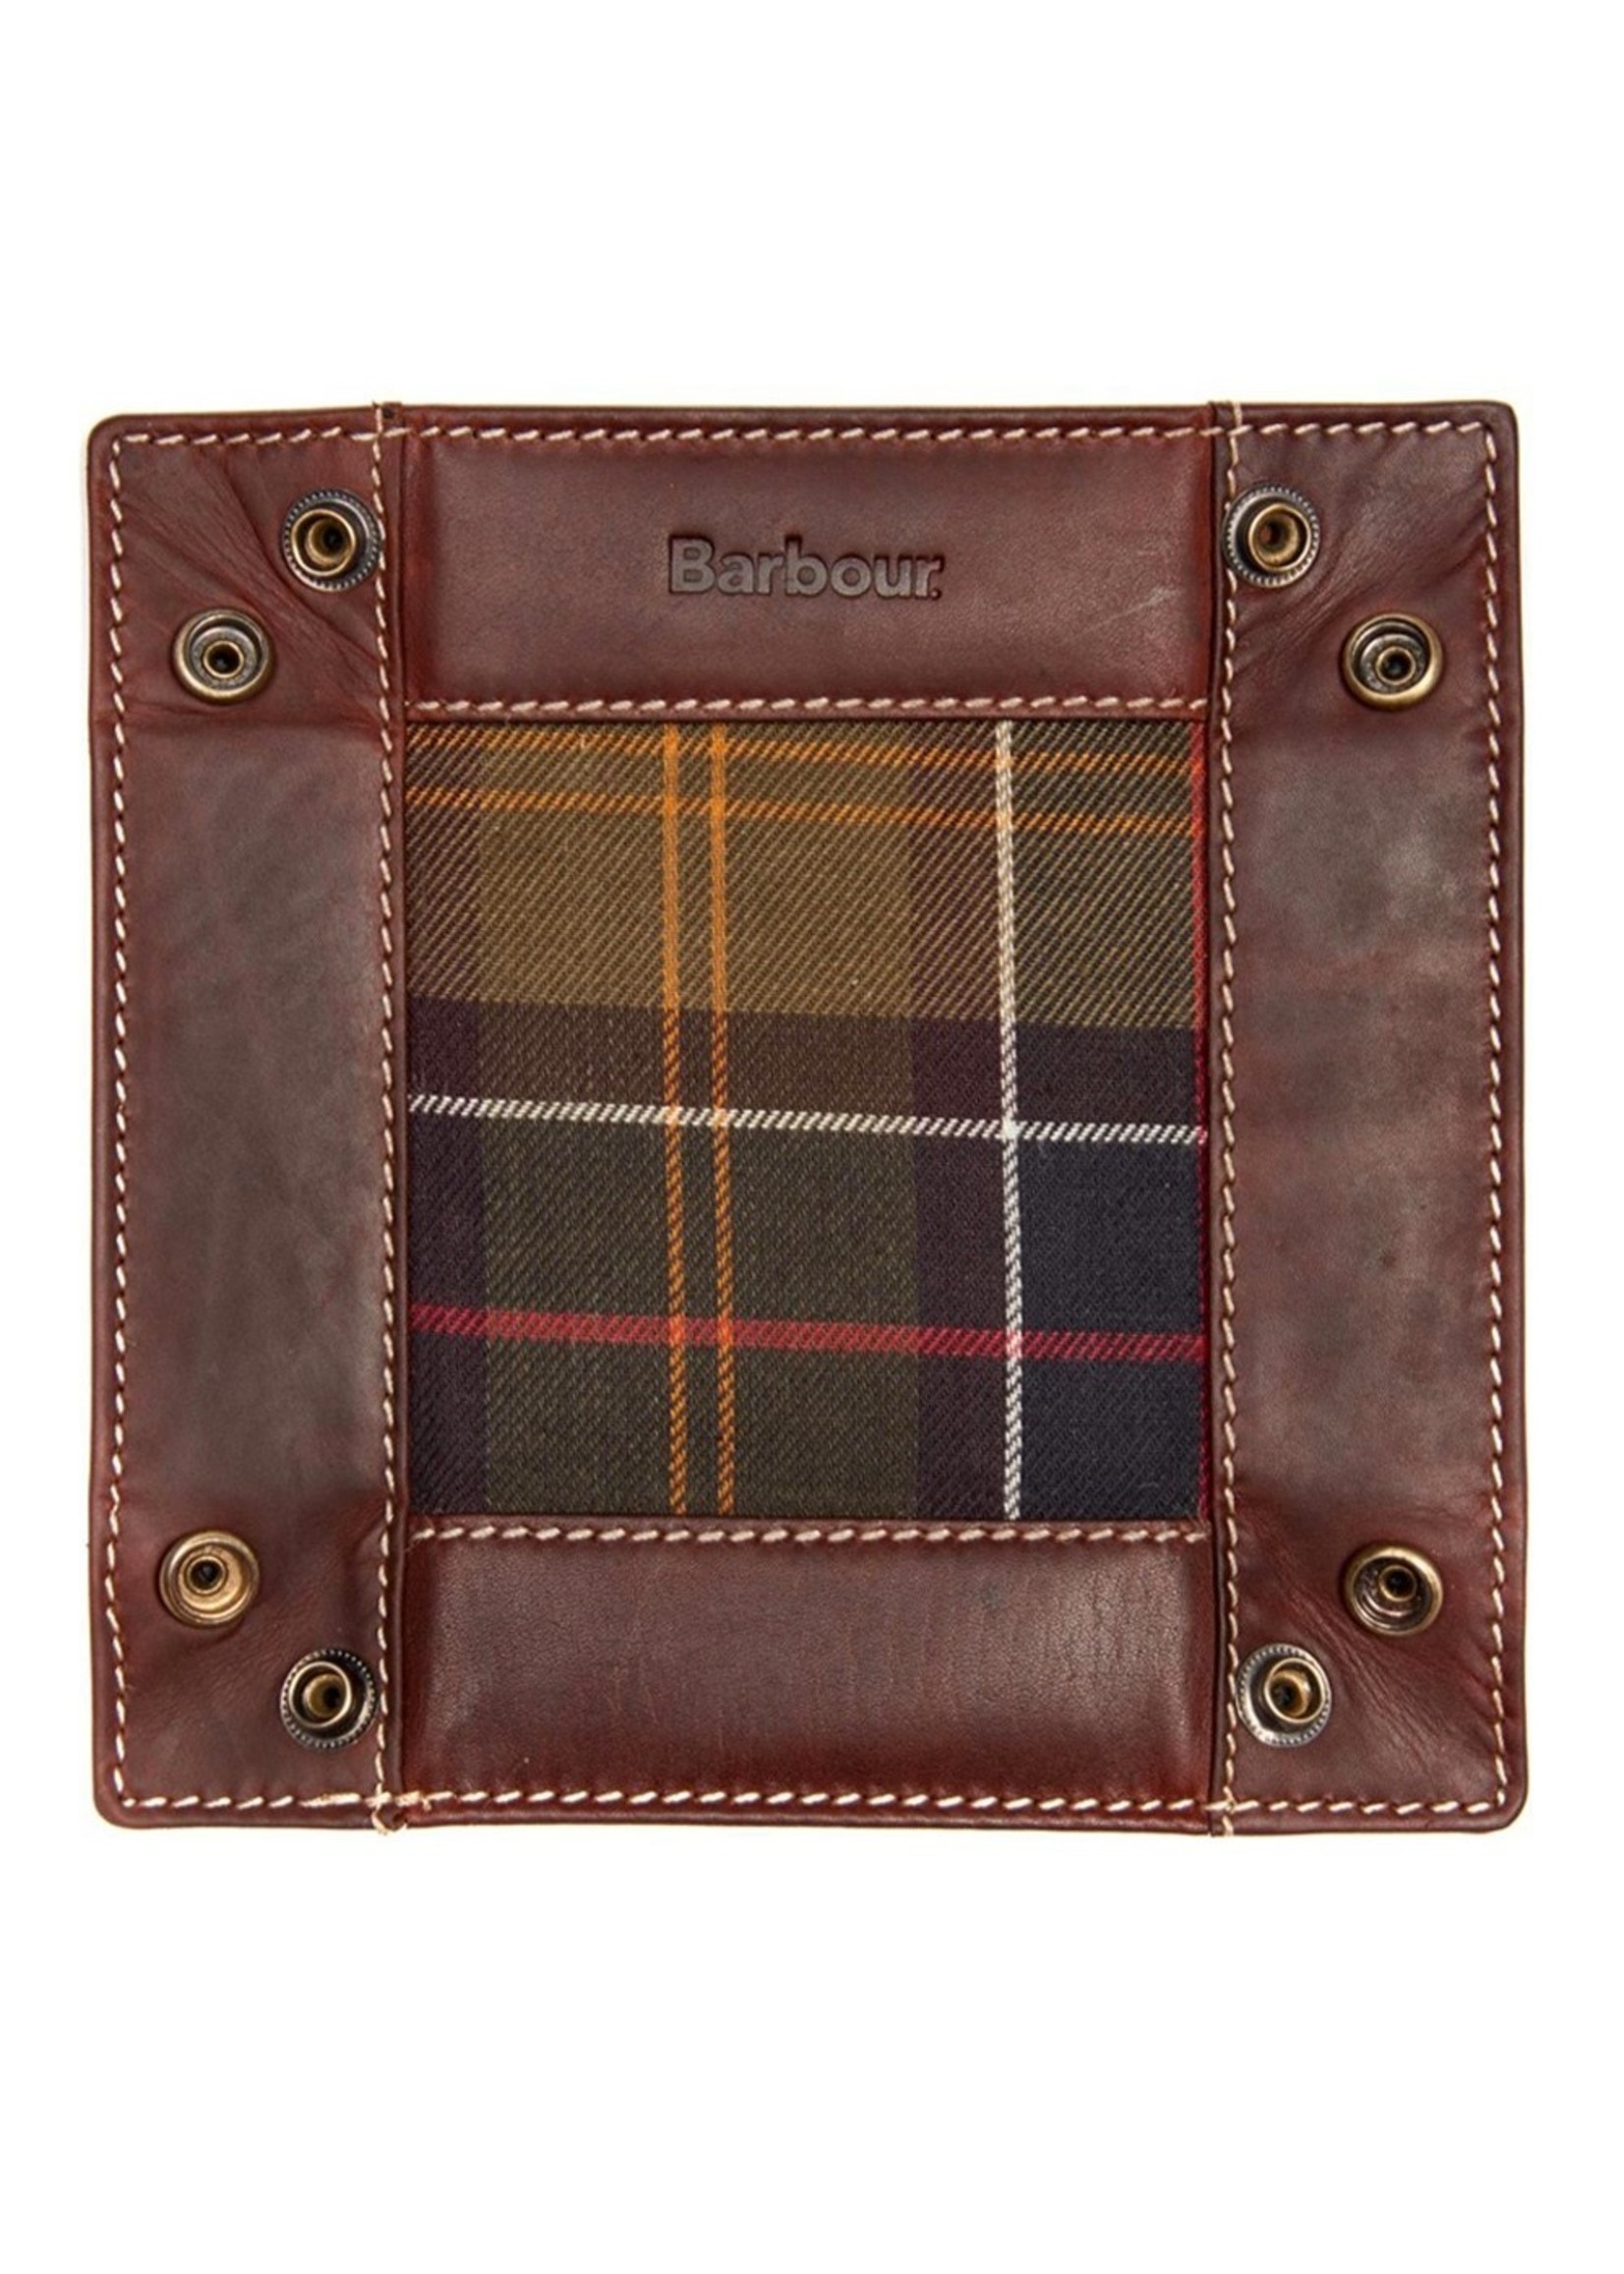 Barbour VALET TRAY - TARTAN & LEATHER